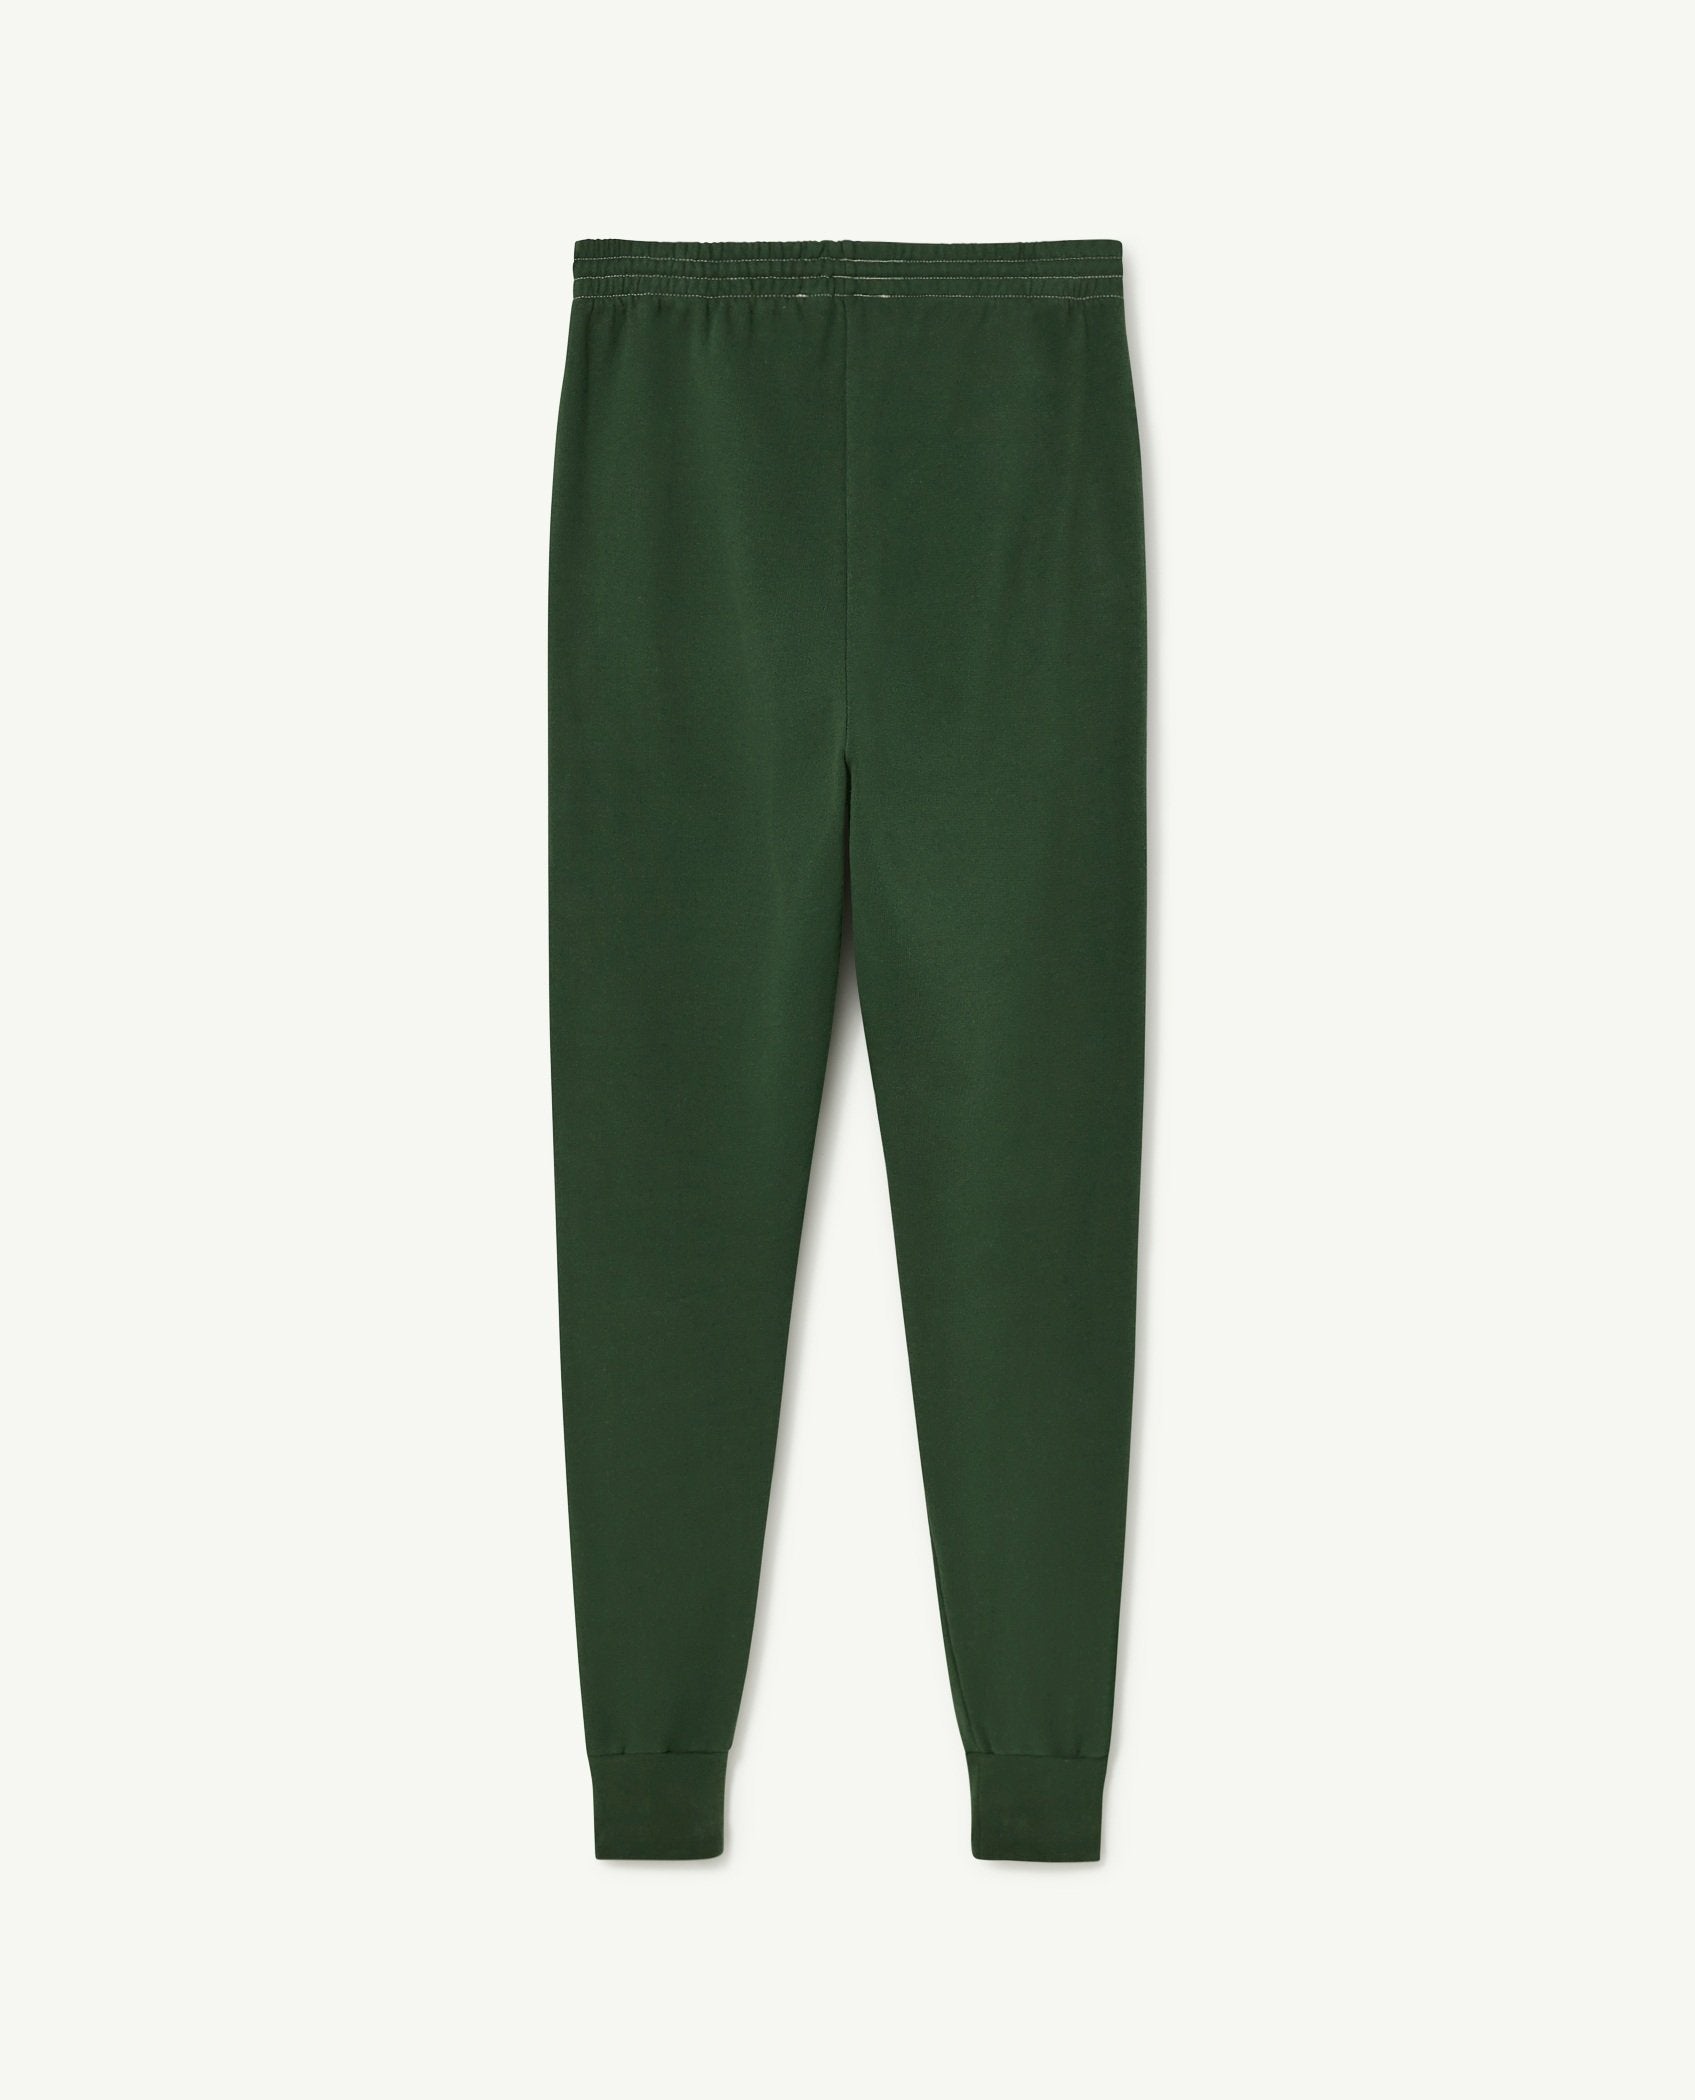 Green Panther Adult Pants PRODUCT BACK